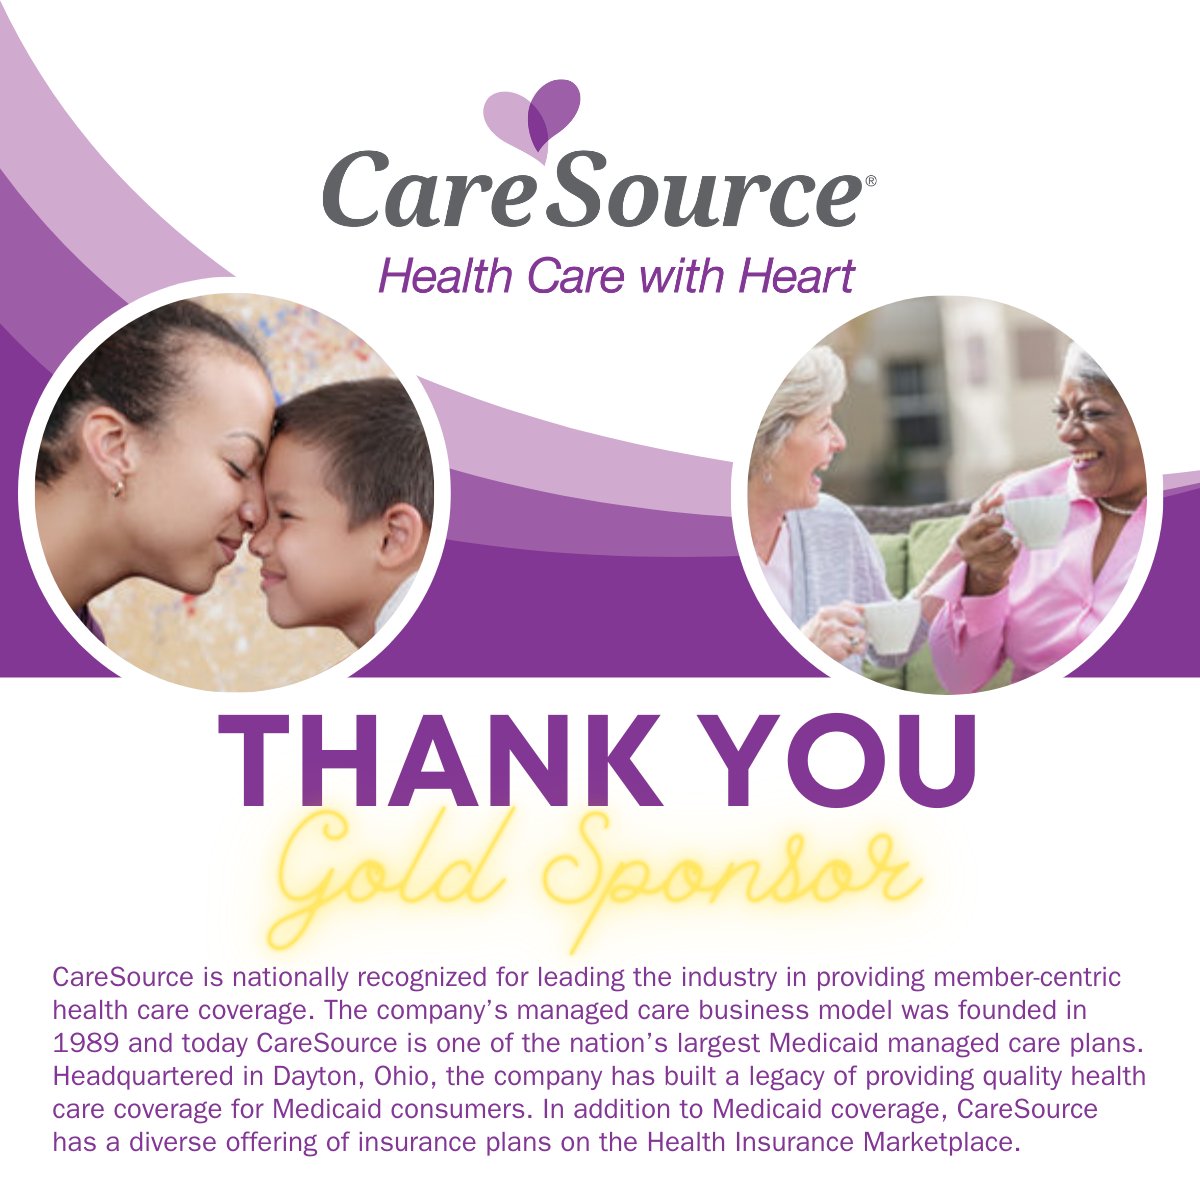 Thank you to Care Source for being a gold sponsor at the Ohio Council’s upcoming 2023 Annual Conference. To learn more about Care Source, please visit: caresource.com